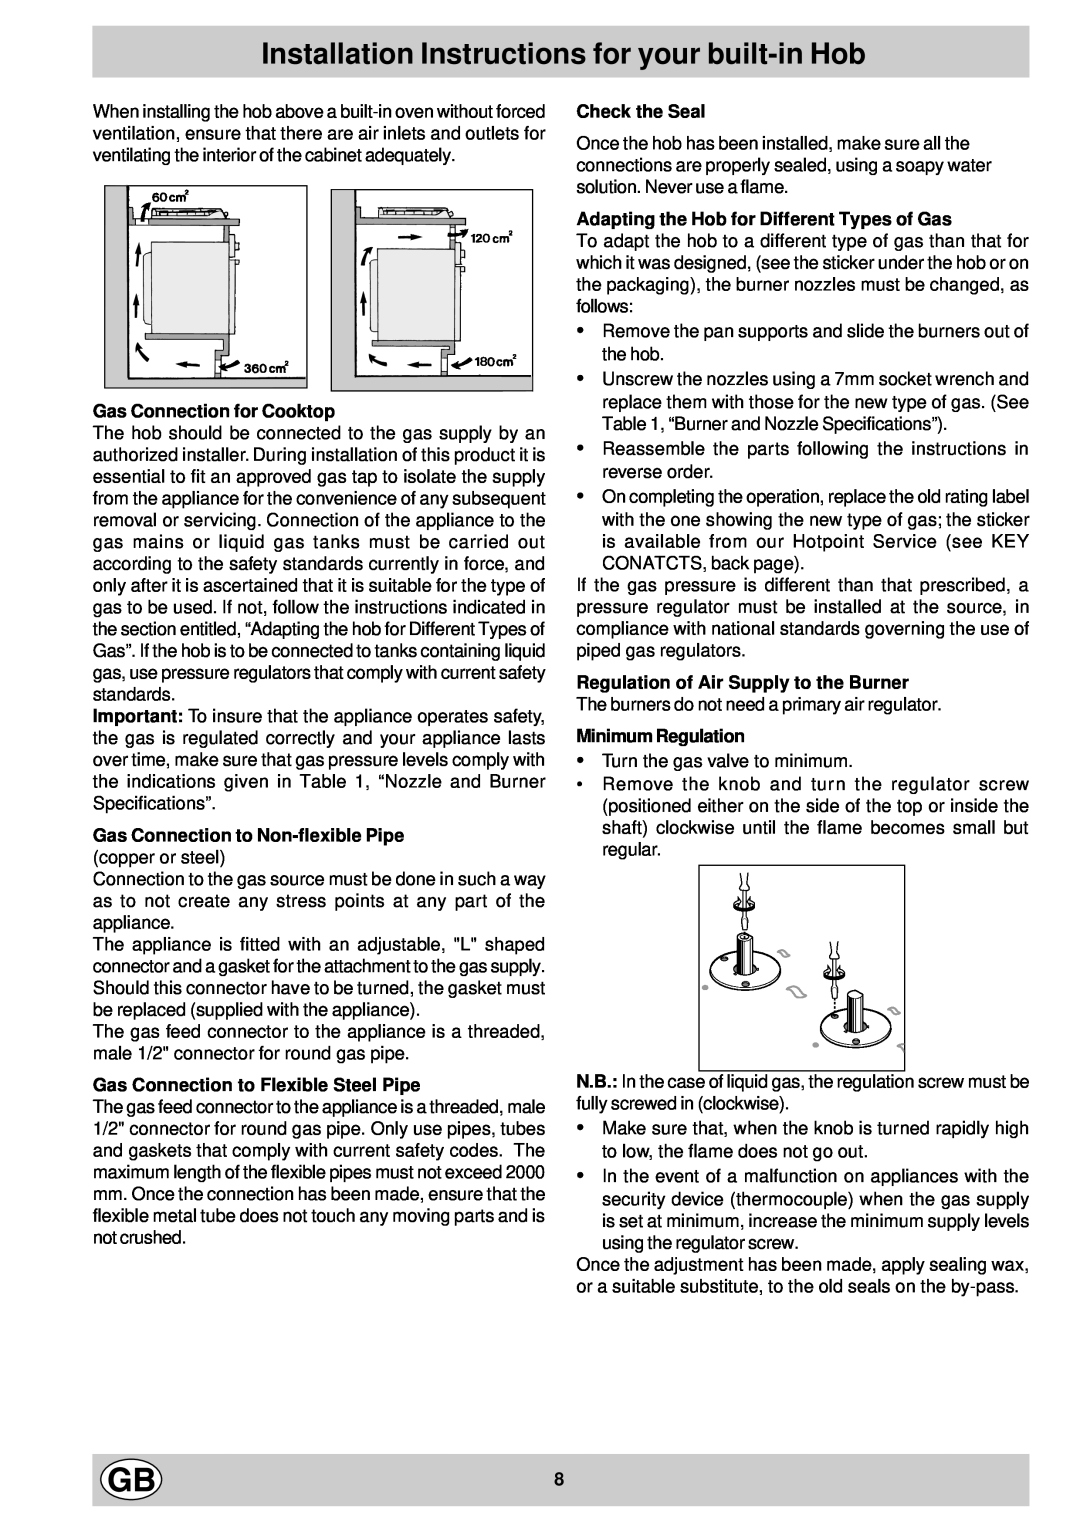 Hotpoint G640 manual Installation Instructions for your built-in Hob, Gas Connection for Cooktop, Check the Seal 